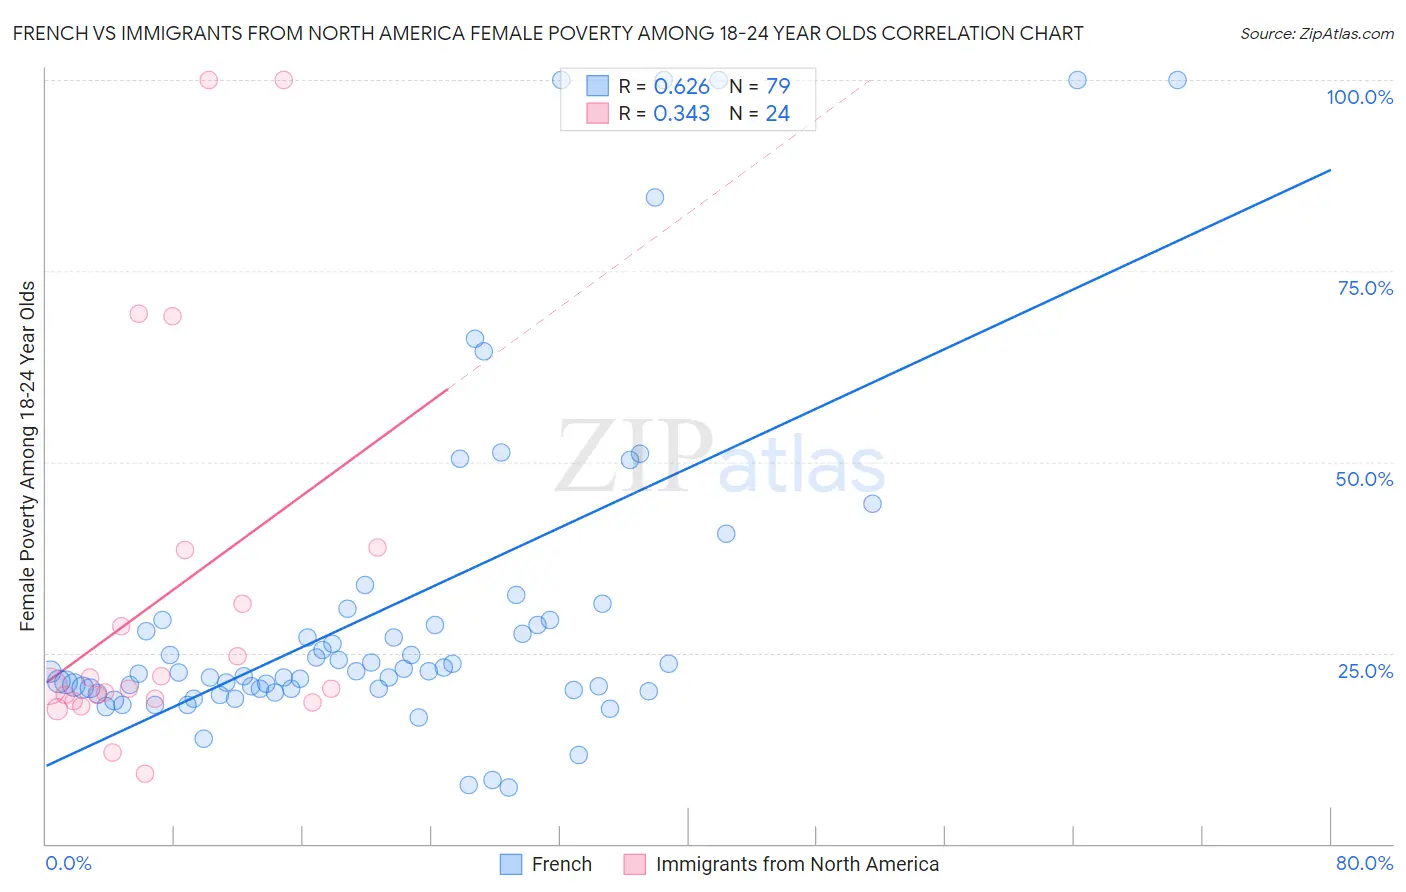 French vs Immigrants from North America Female Poverty Among 18-24 Year Olds